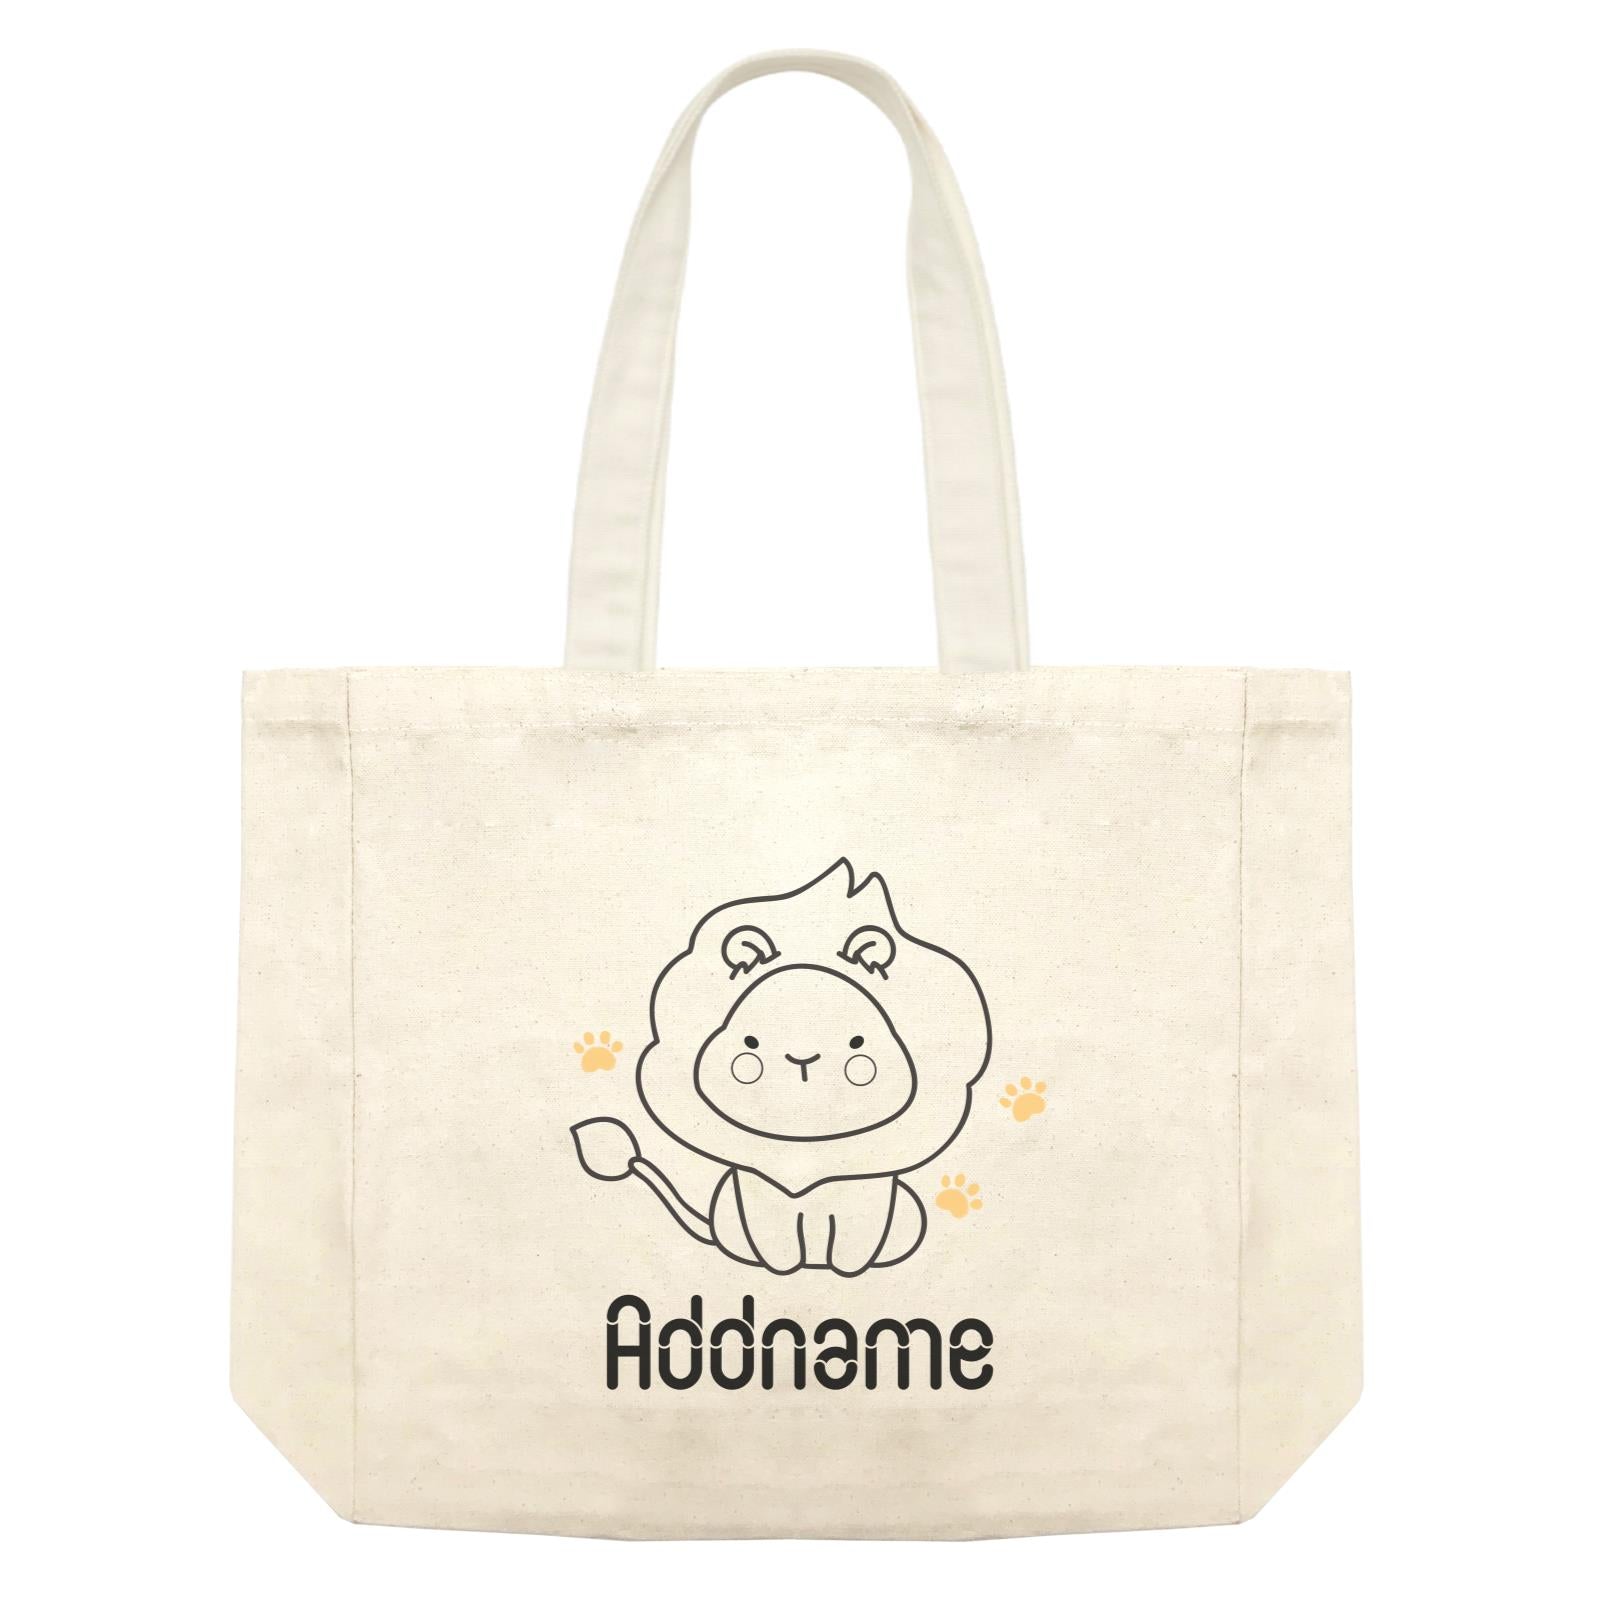 Coloring Outline Cute Hand Drawn Animals Safari Lion Addname Shopping Bag